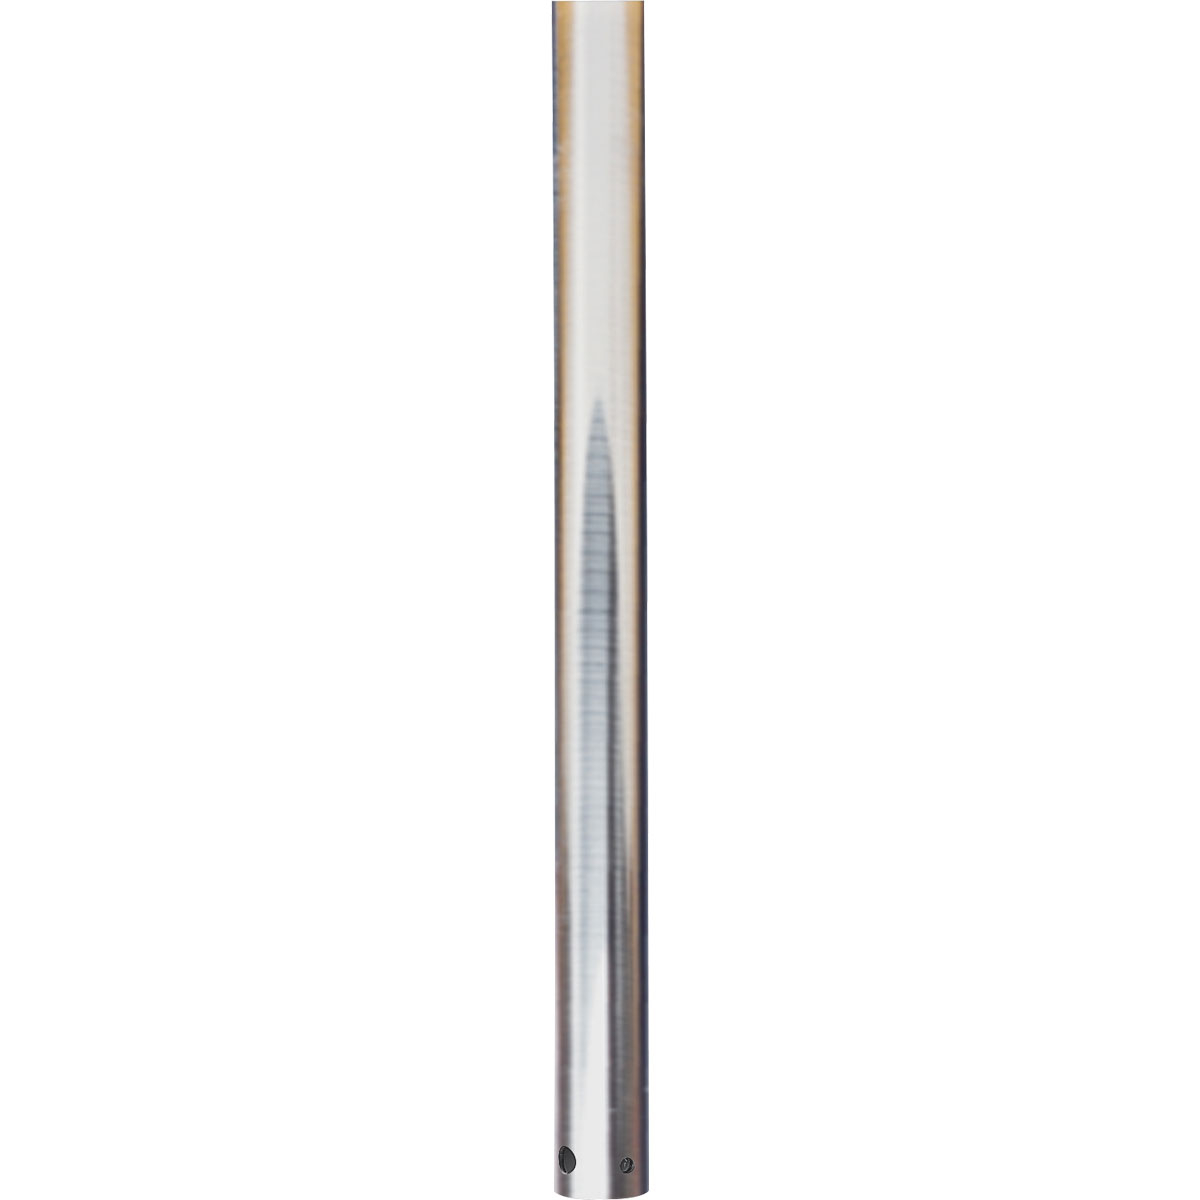 3/4 In. x 12 In. downrod for use with any Progress Lighting ceiling fan. Use of a fan downrod positions your ceiling fan at the optimal height for air circulation and provides the perfect solution for installation on high cathedral ceilings or in great rooms. Refer to the selection guide for recommended downrod lengths based upon your ceiling height. Brushed Nickel finish.